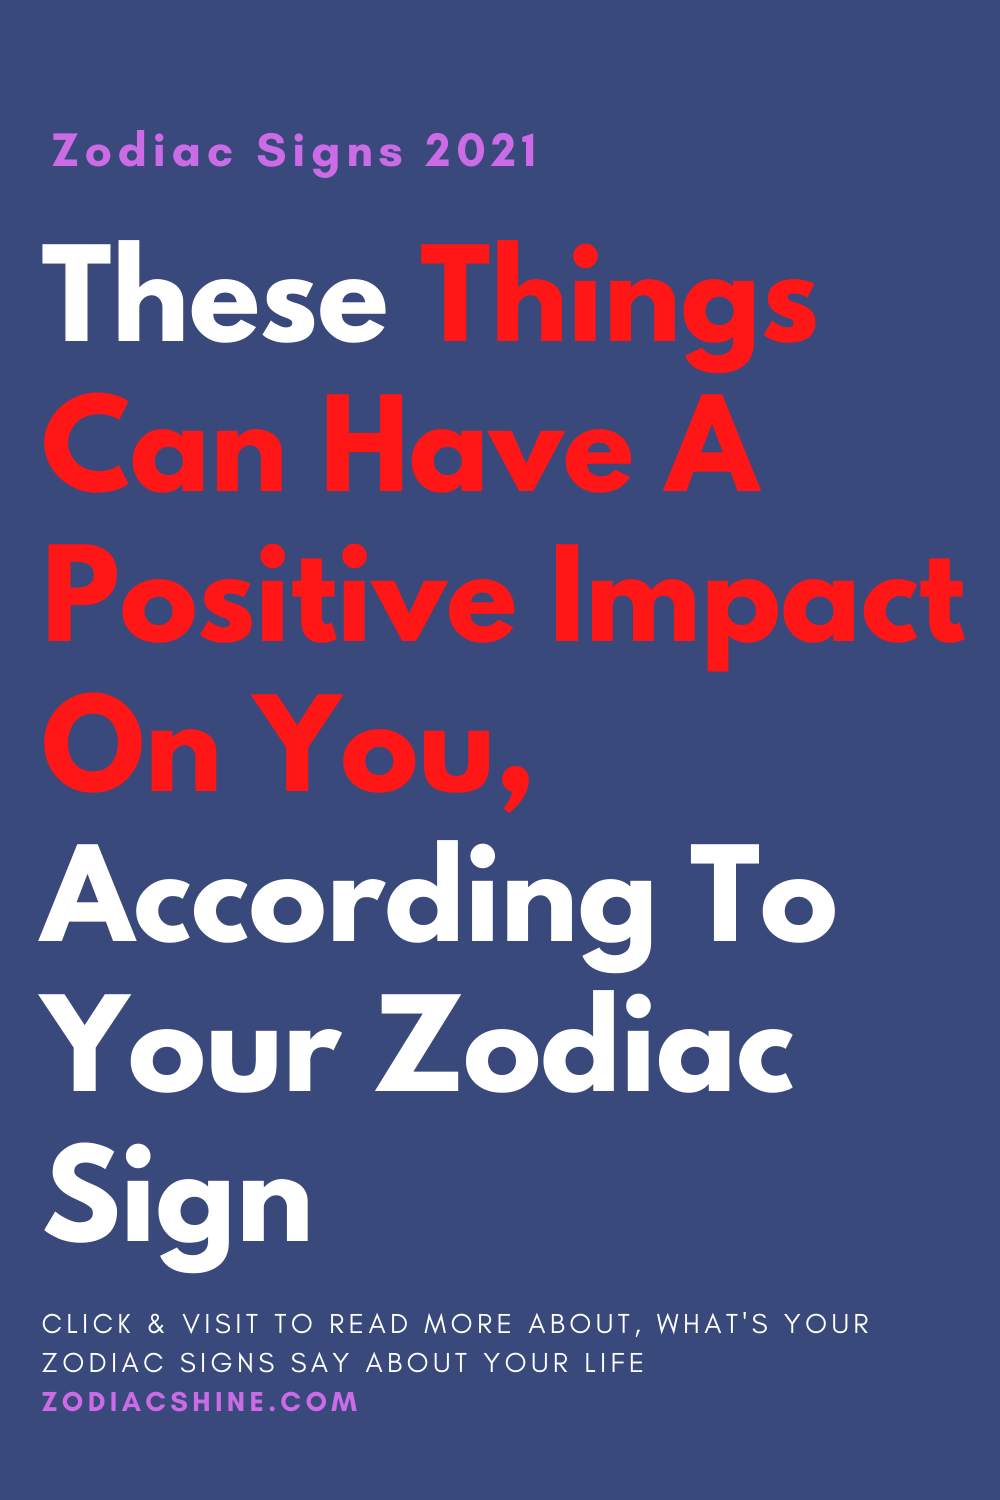 These things can have a positive impact on you, according to your zodiac sign